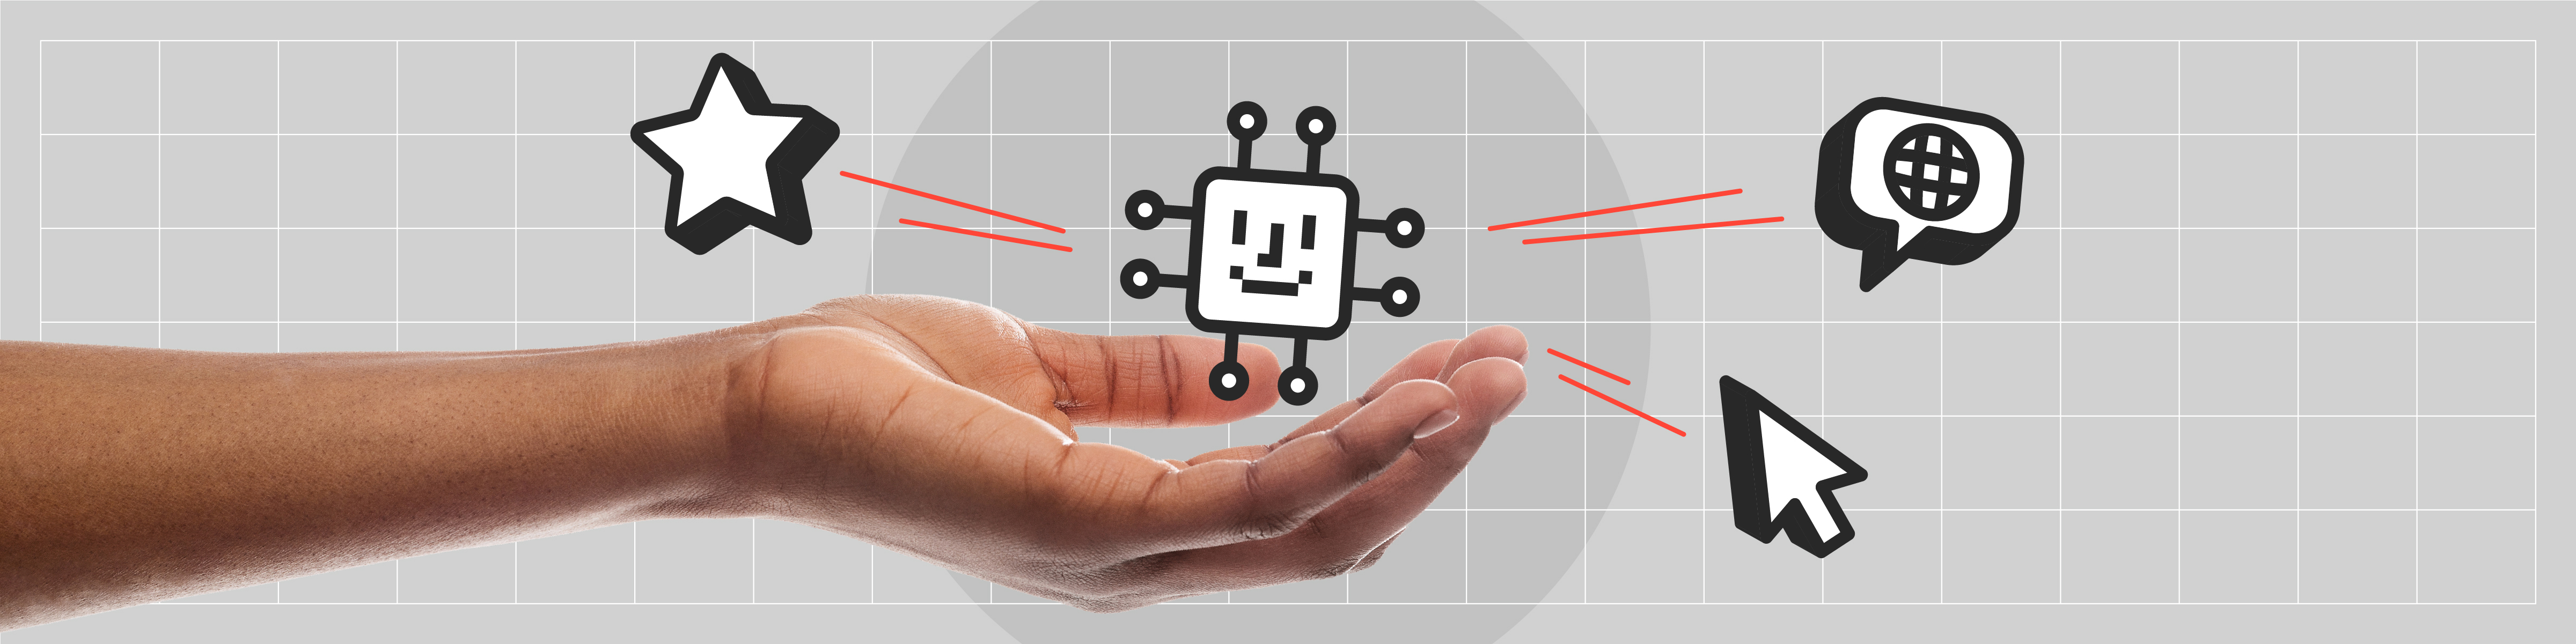 hand holding iconographic representation of artificial intelligent computer chip